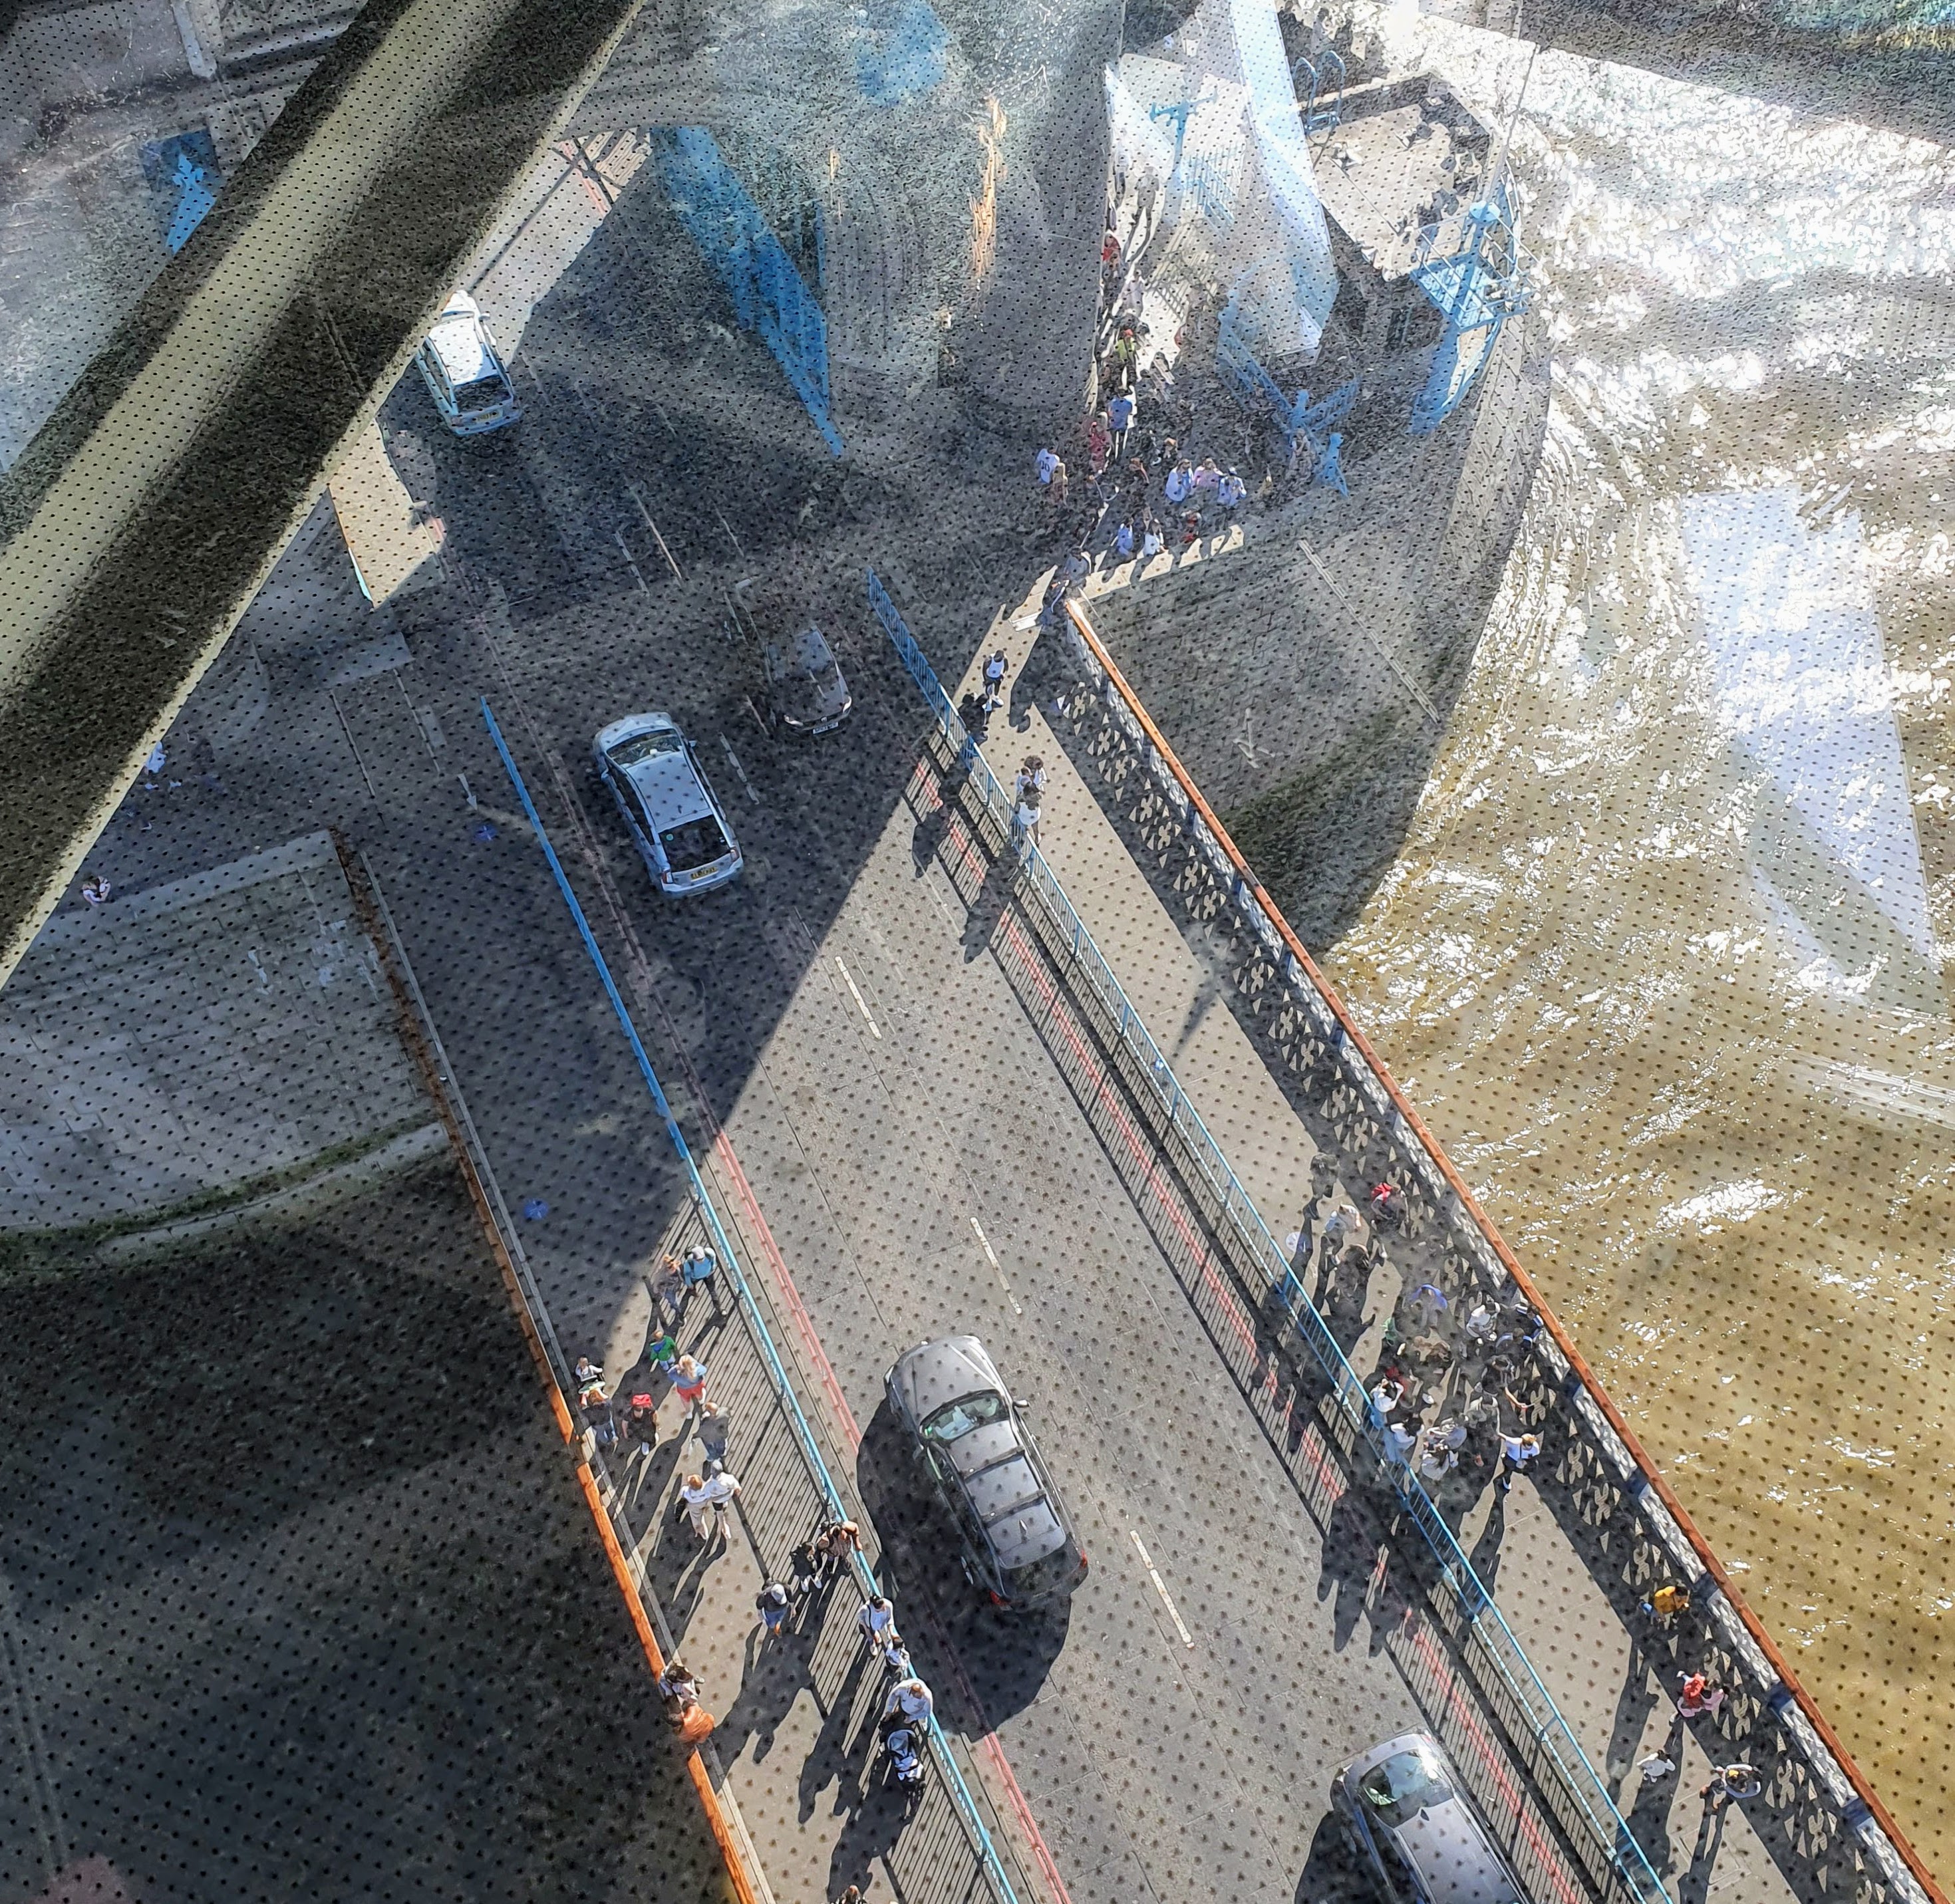 View of the River Thames and the road from the glass walkway of Tower Bridge, London